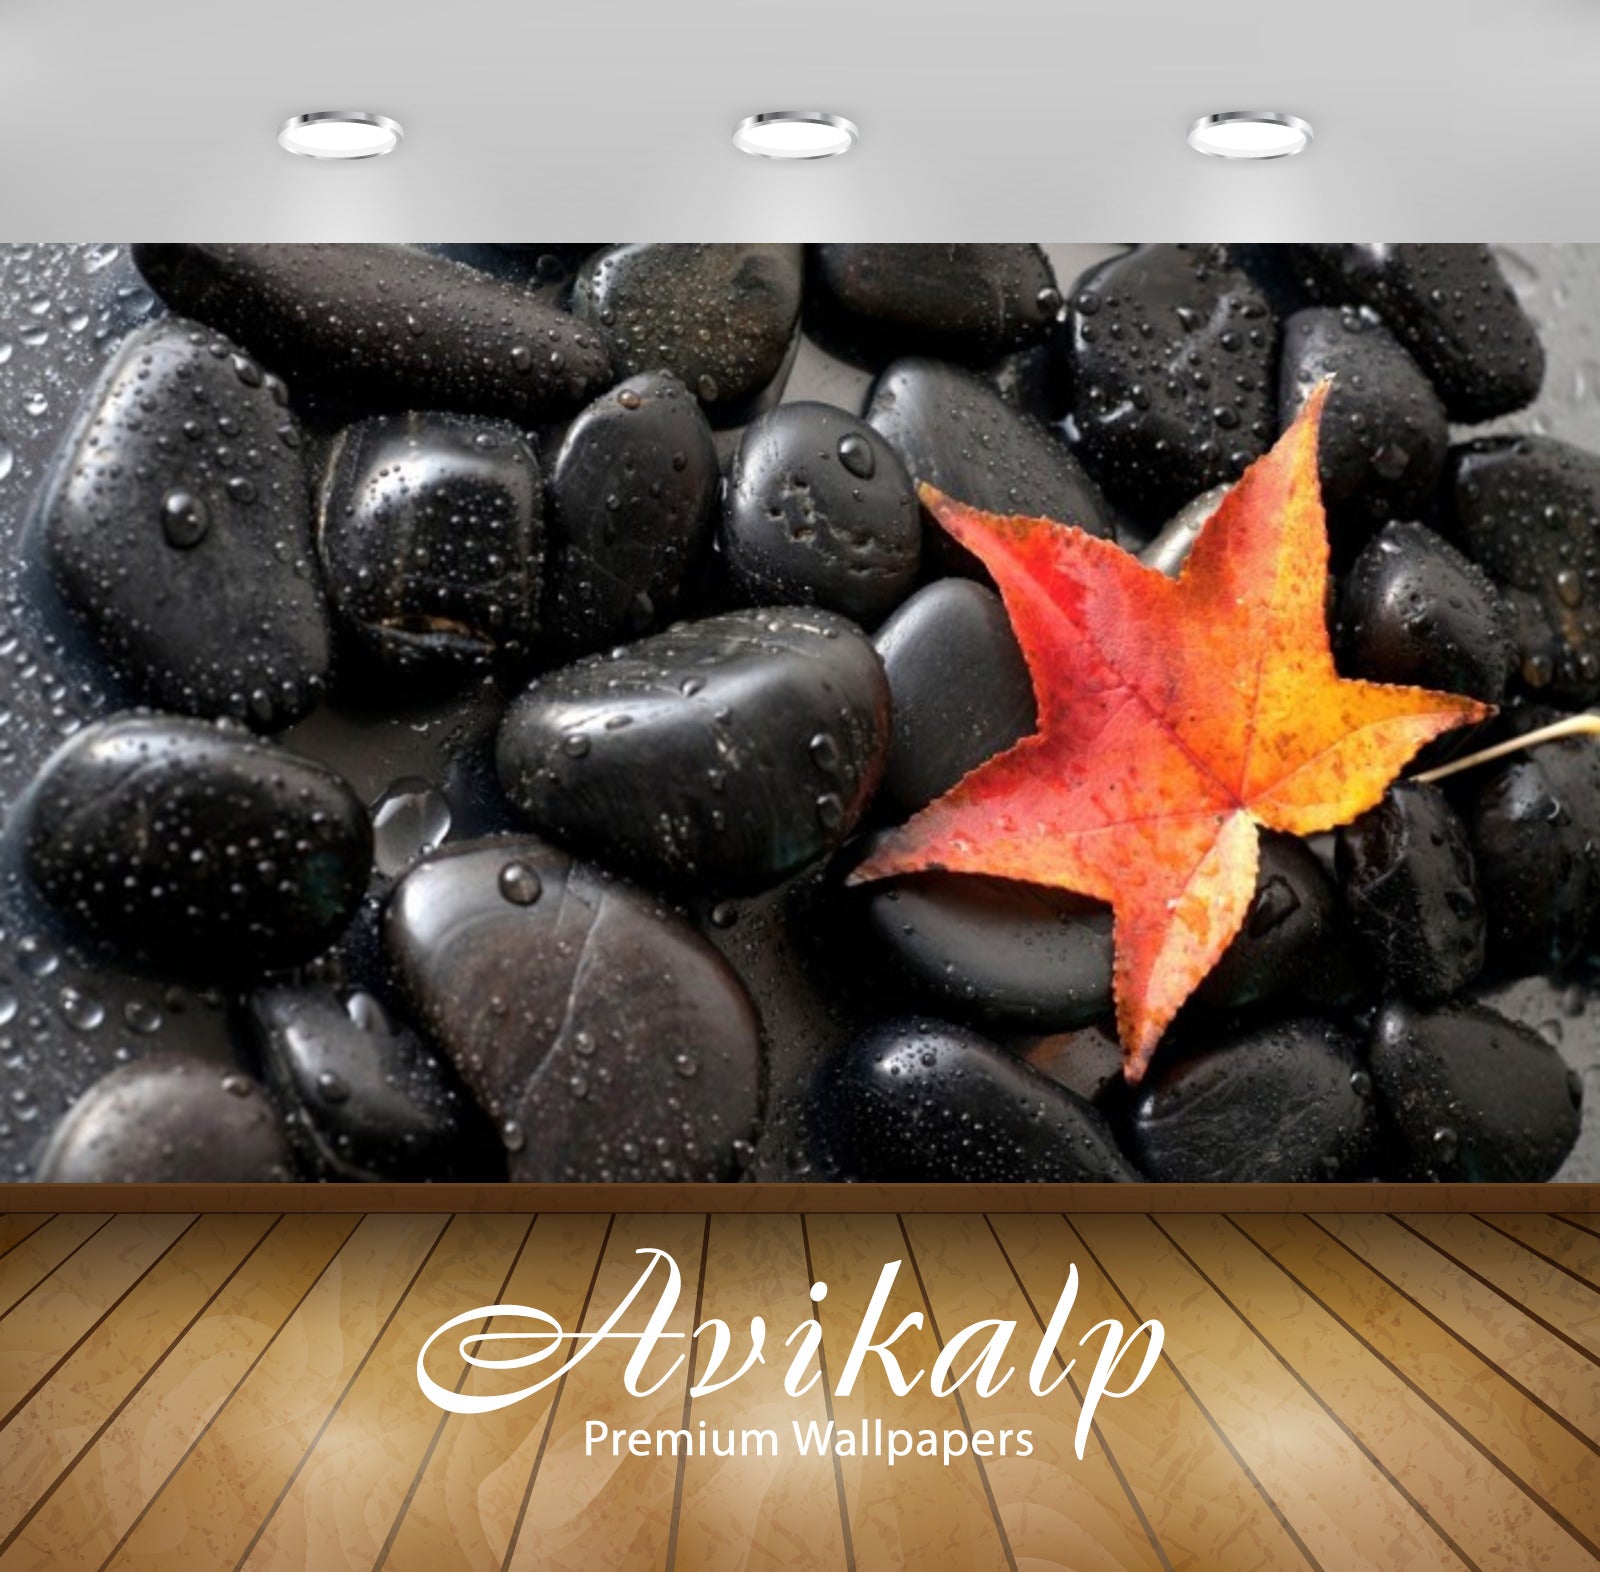 Avikalp Exclusive Awi2678 Gorgeous Black Stones Red Autumn Leaf Full HD Wallpapers for Living room,